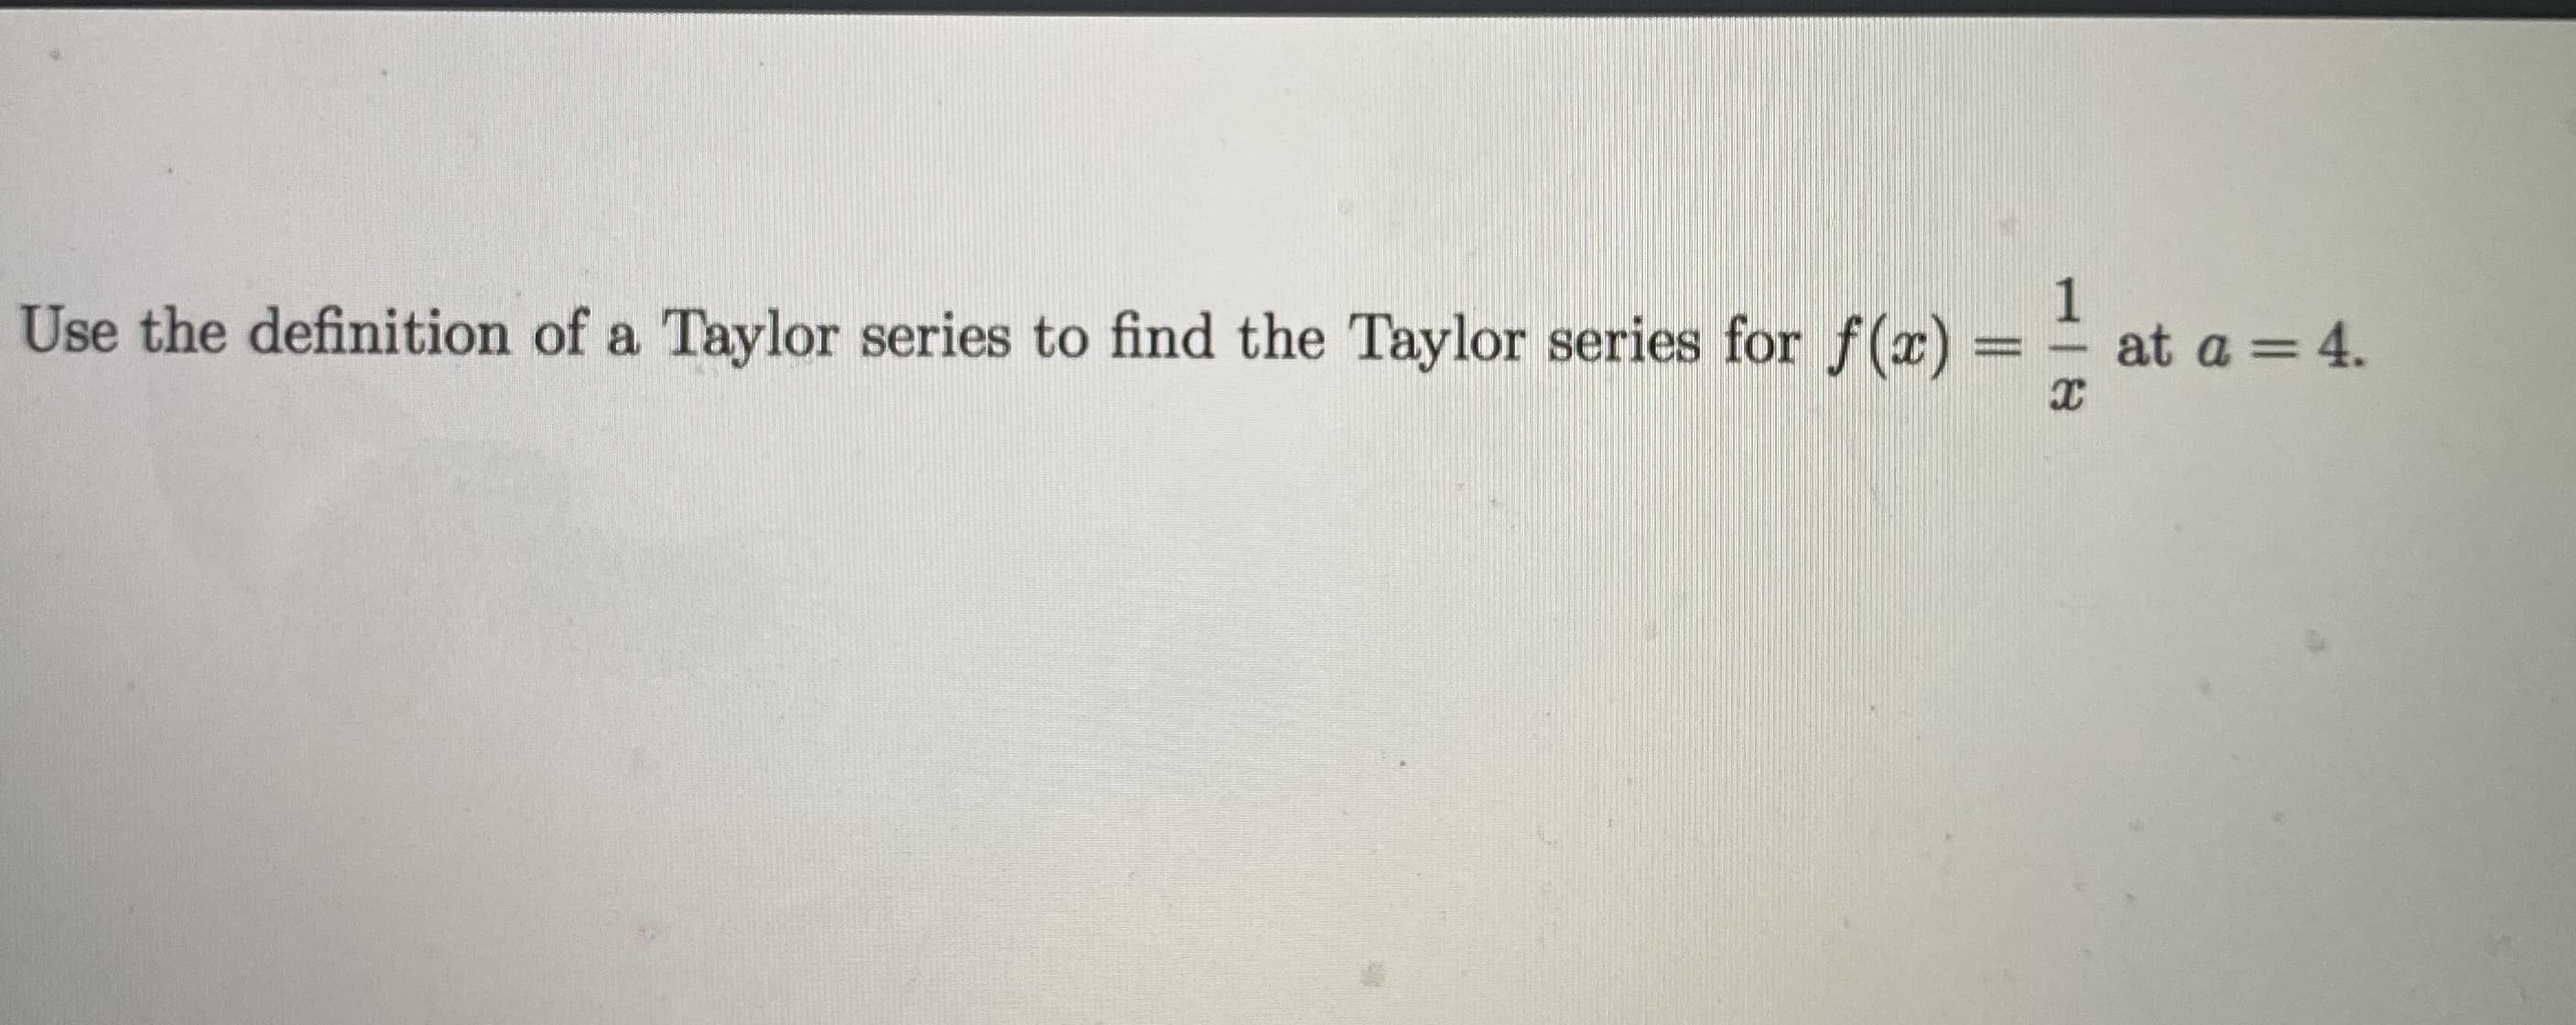 Use the definition of a Taylor series to find the Taylor series for f(x)
1
at a = 4.
||
